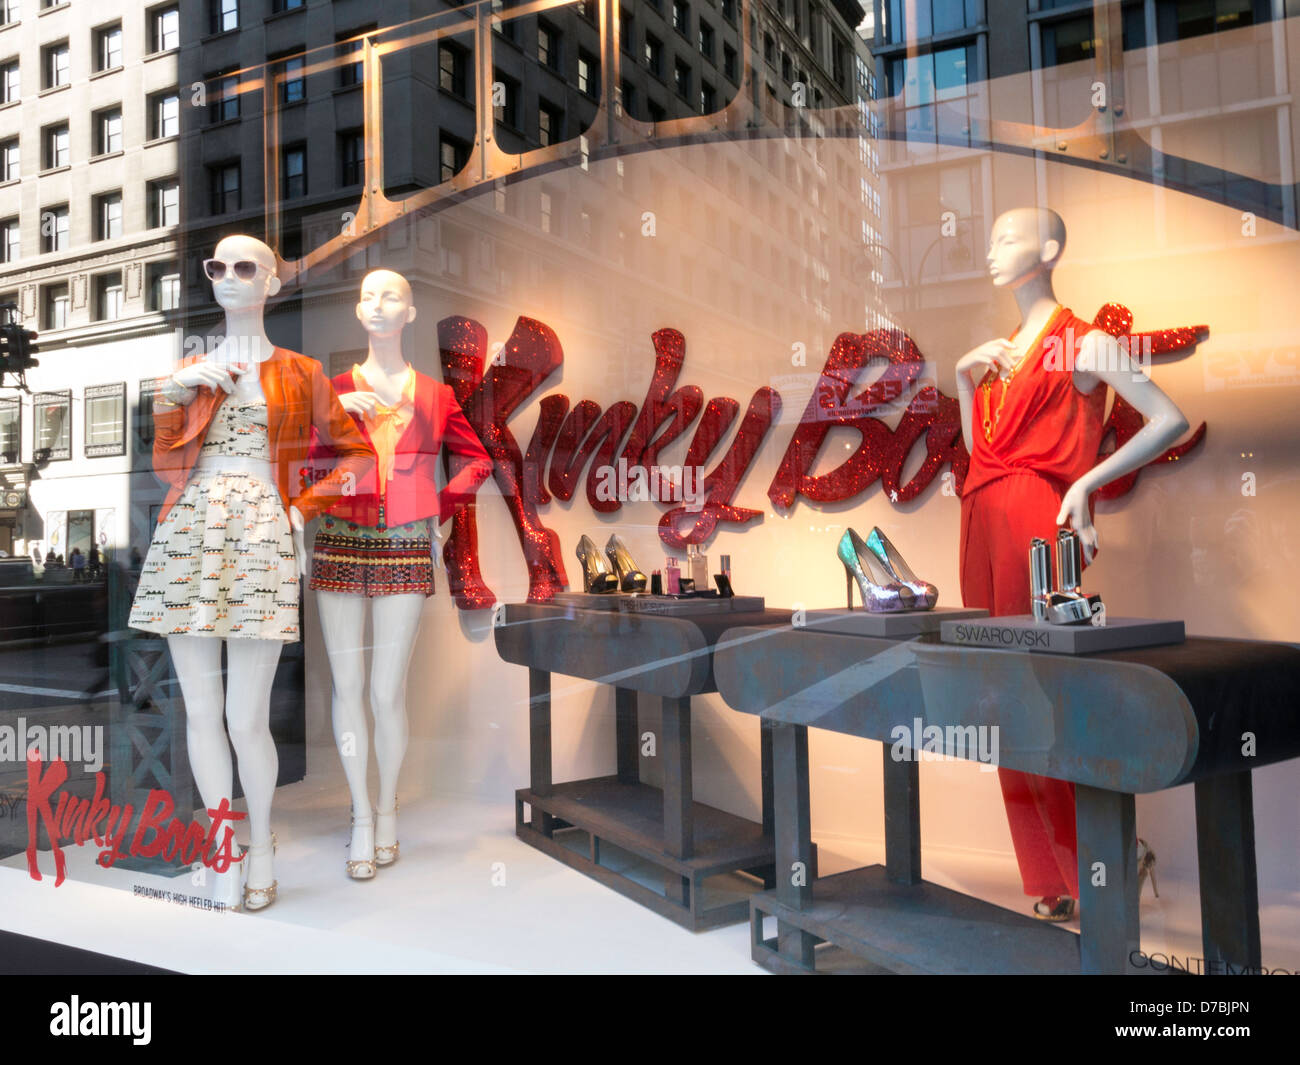 Kinky Boots Broadway vitrine musicale, Lord & Taylor, Flagship Store, 424 Fifth Avenue, NYC 2013 Banque D'Images